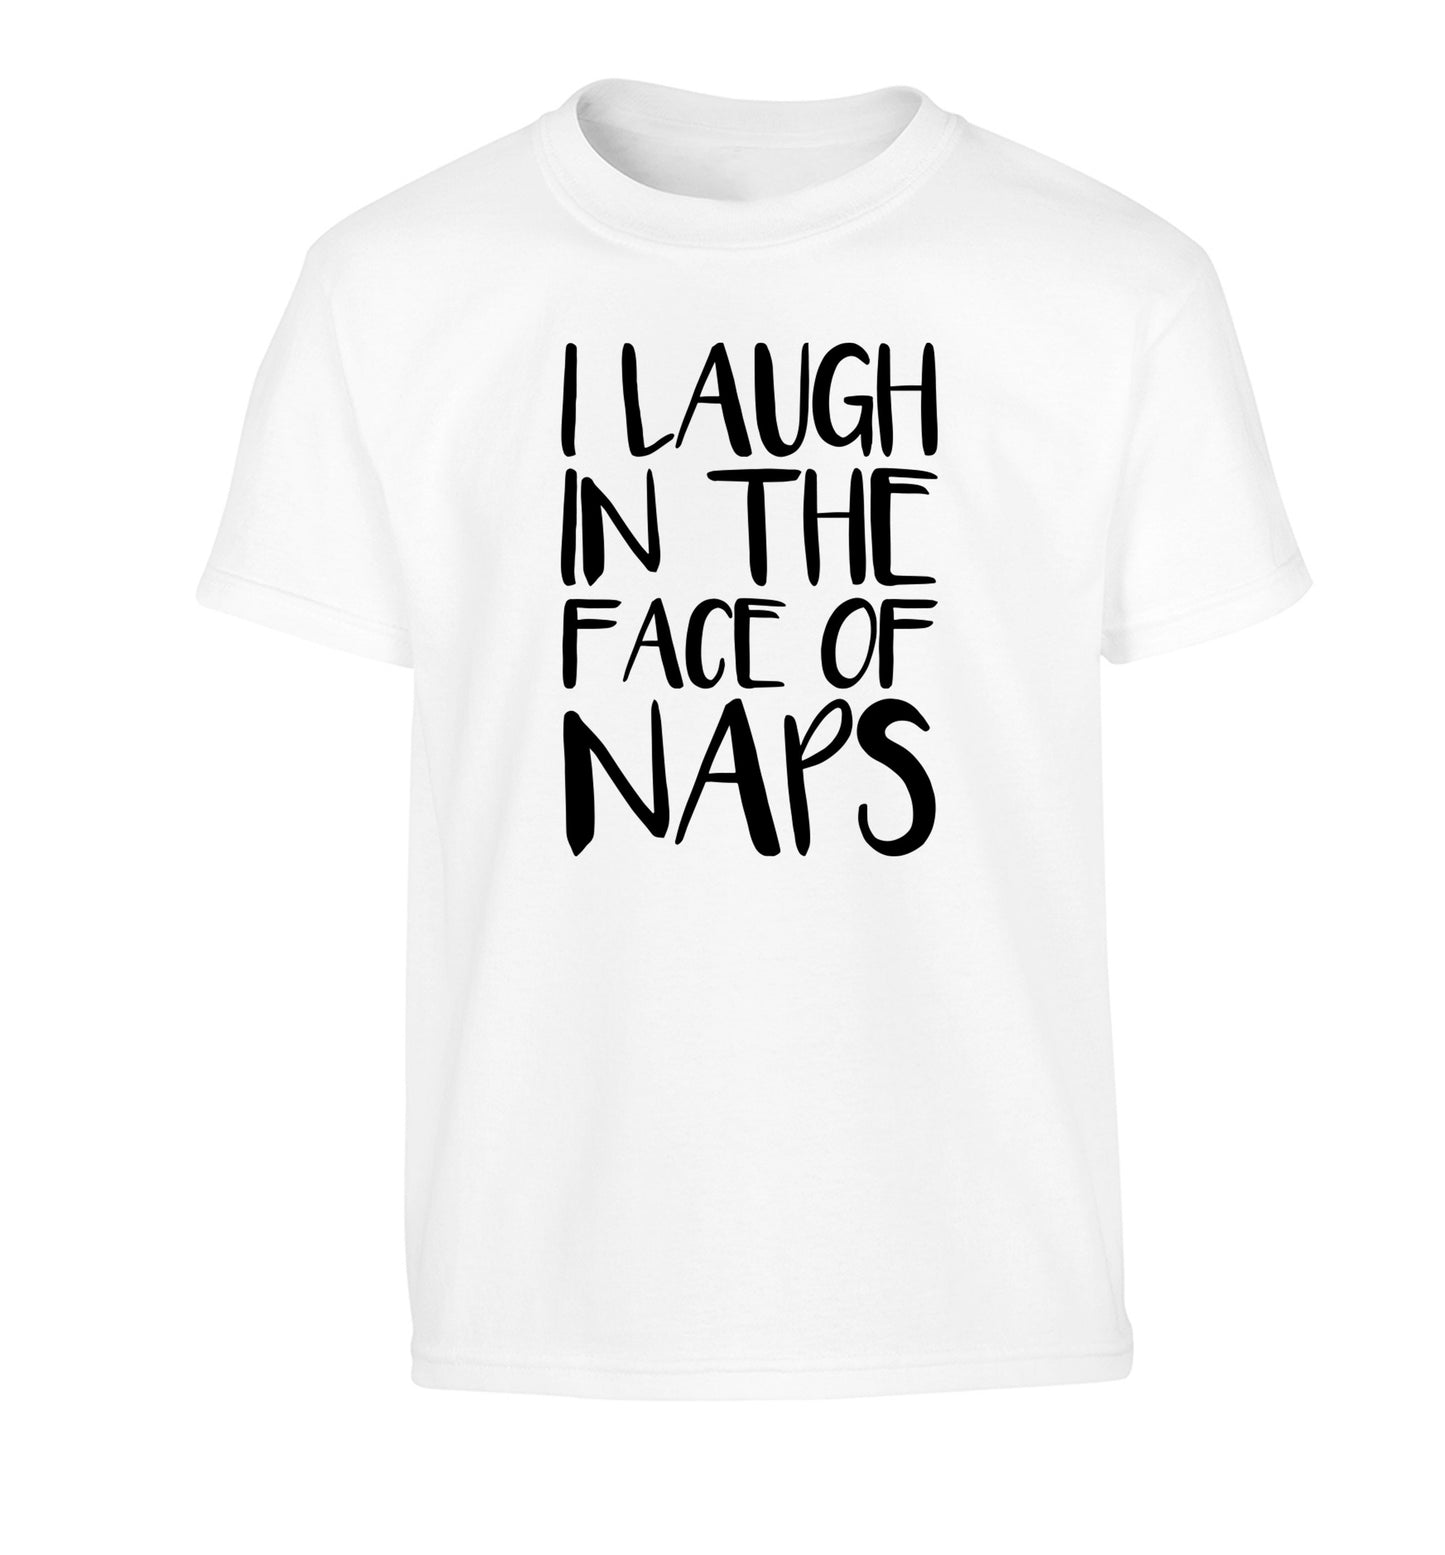 I laugh in the face of naps Children's white Tshirt 12-14 Years